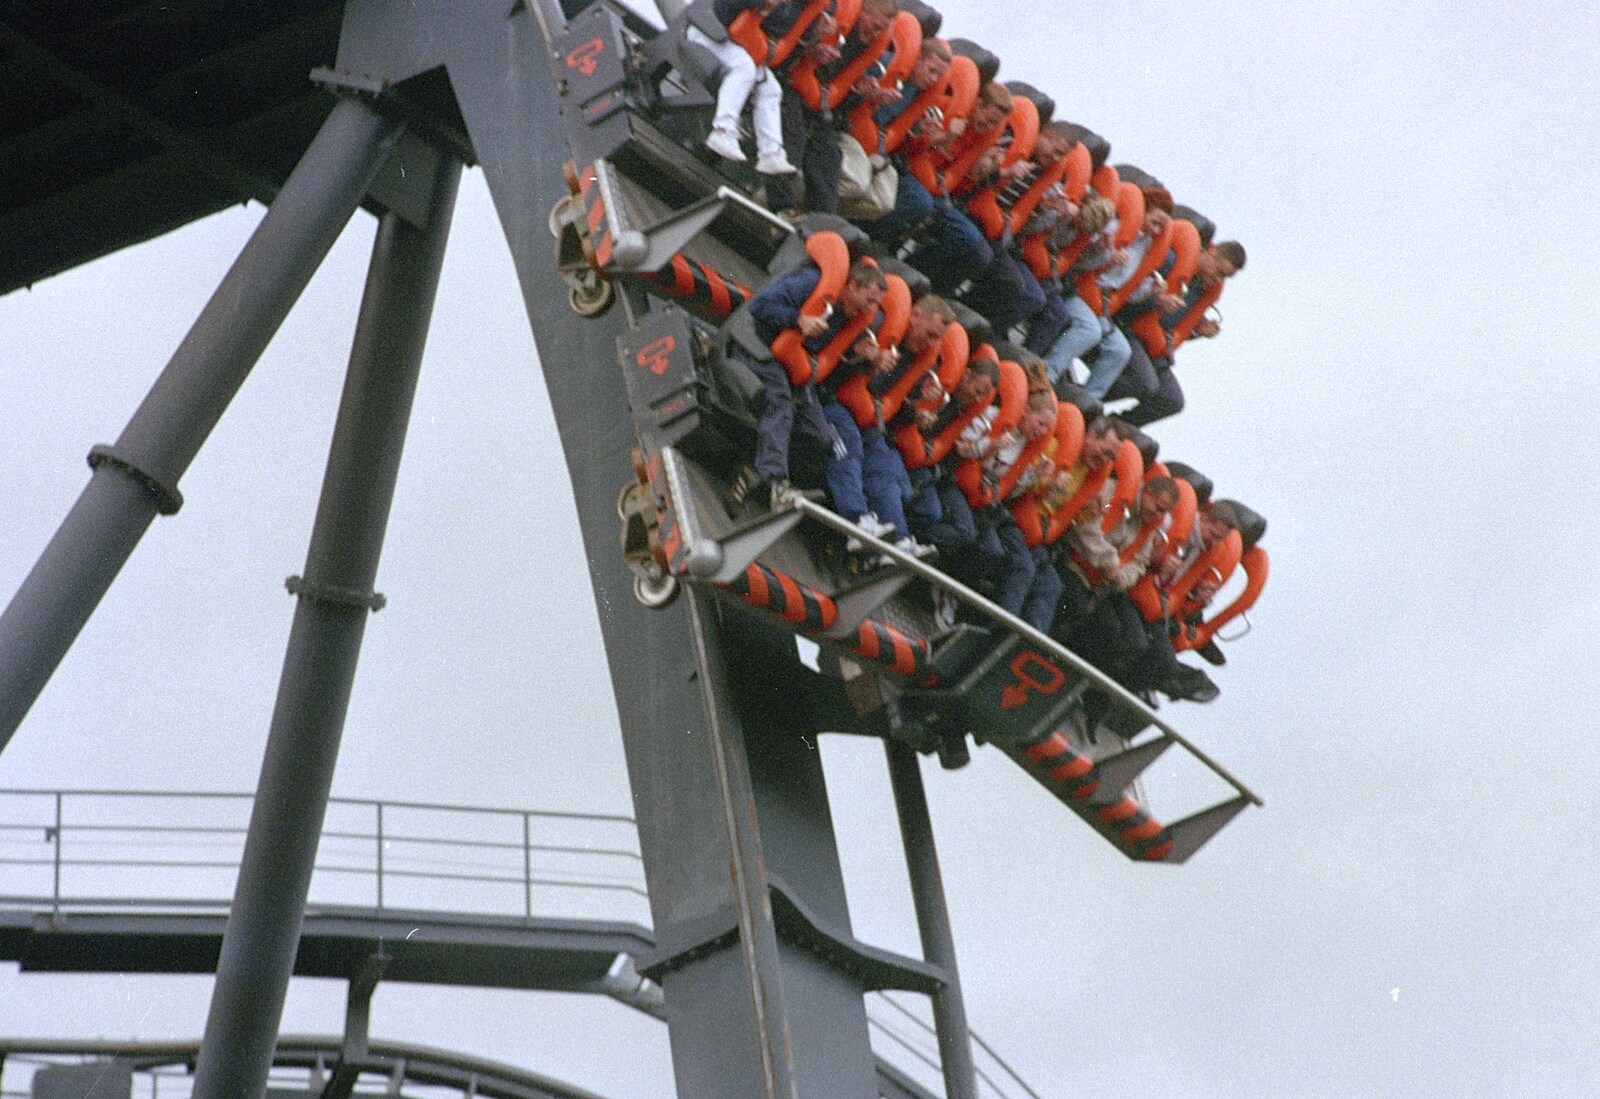 A Trip to Alton Towers, Staffordshire - 15th June 2000: More victims pile into Oblivion